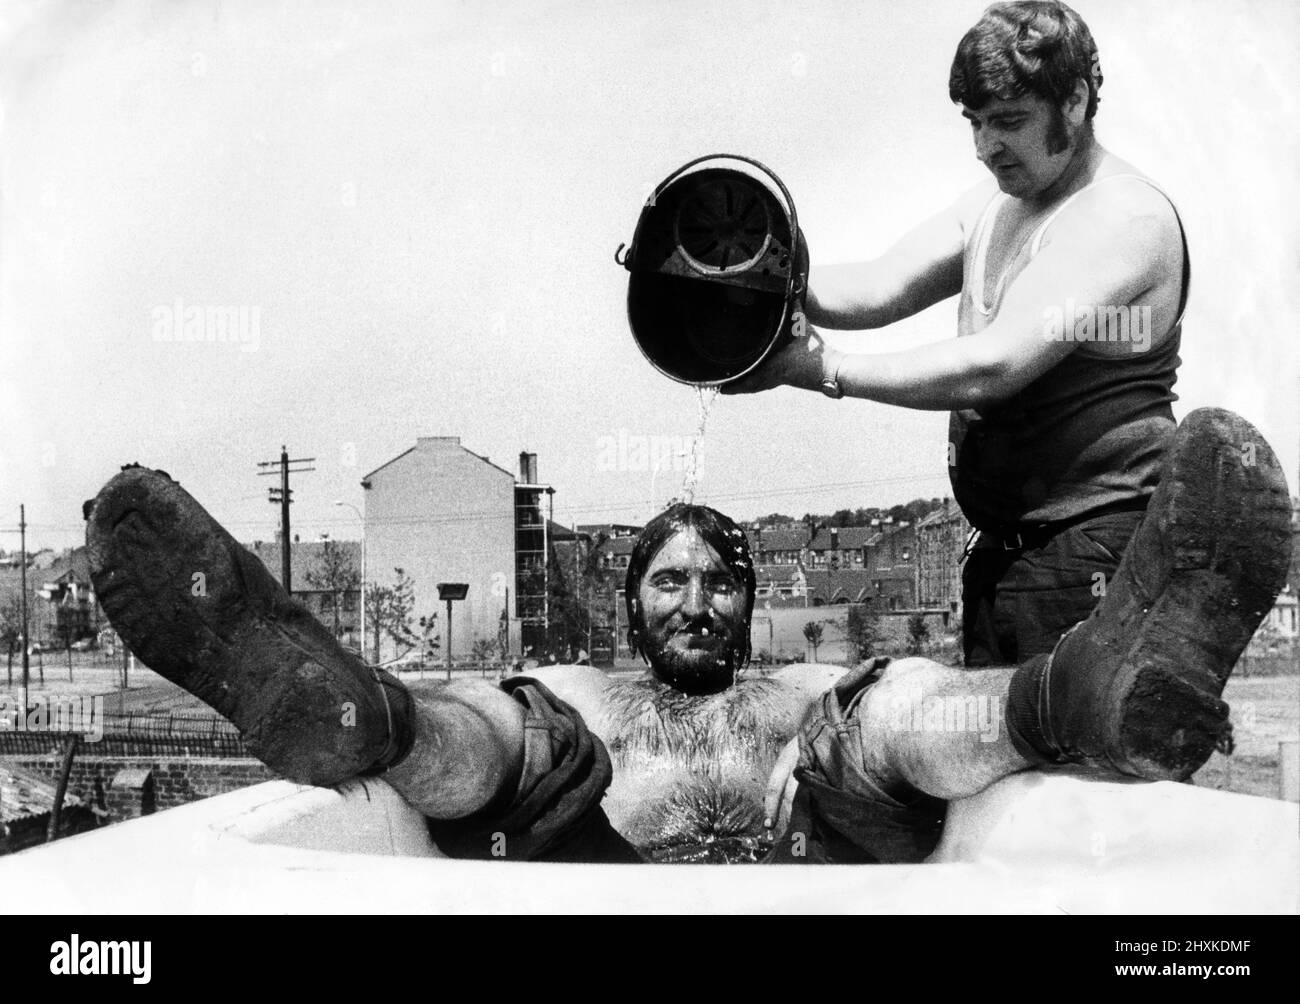 Shifting tons of scrap metal is no joke when the temperature is hitting the 80s. But it became a real pleasure when bearded Donald Morrison, 19, and 26 year old Frank Kay found a rusty old bath at J and W Robinson's yard in Partick, Glasgow. July 1976. Stock Photo